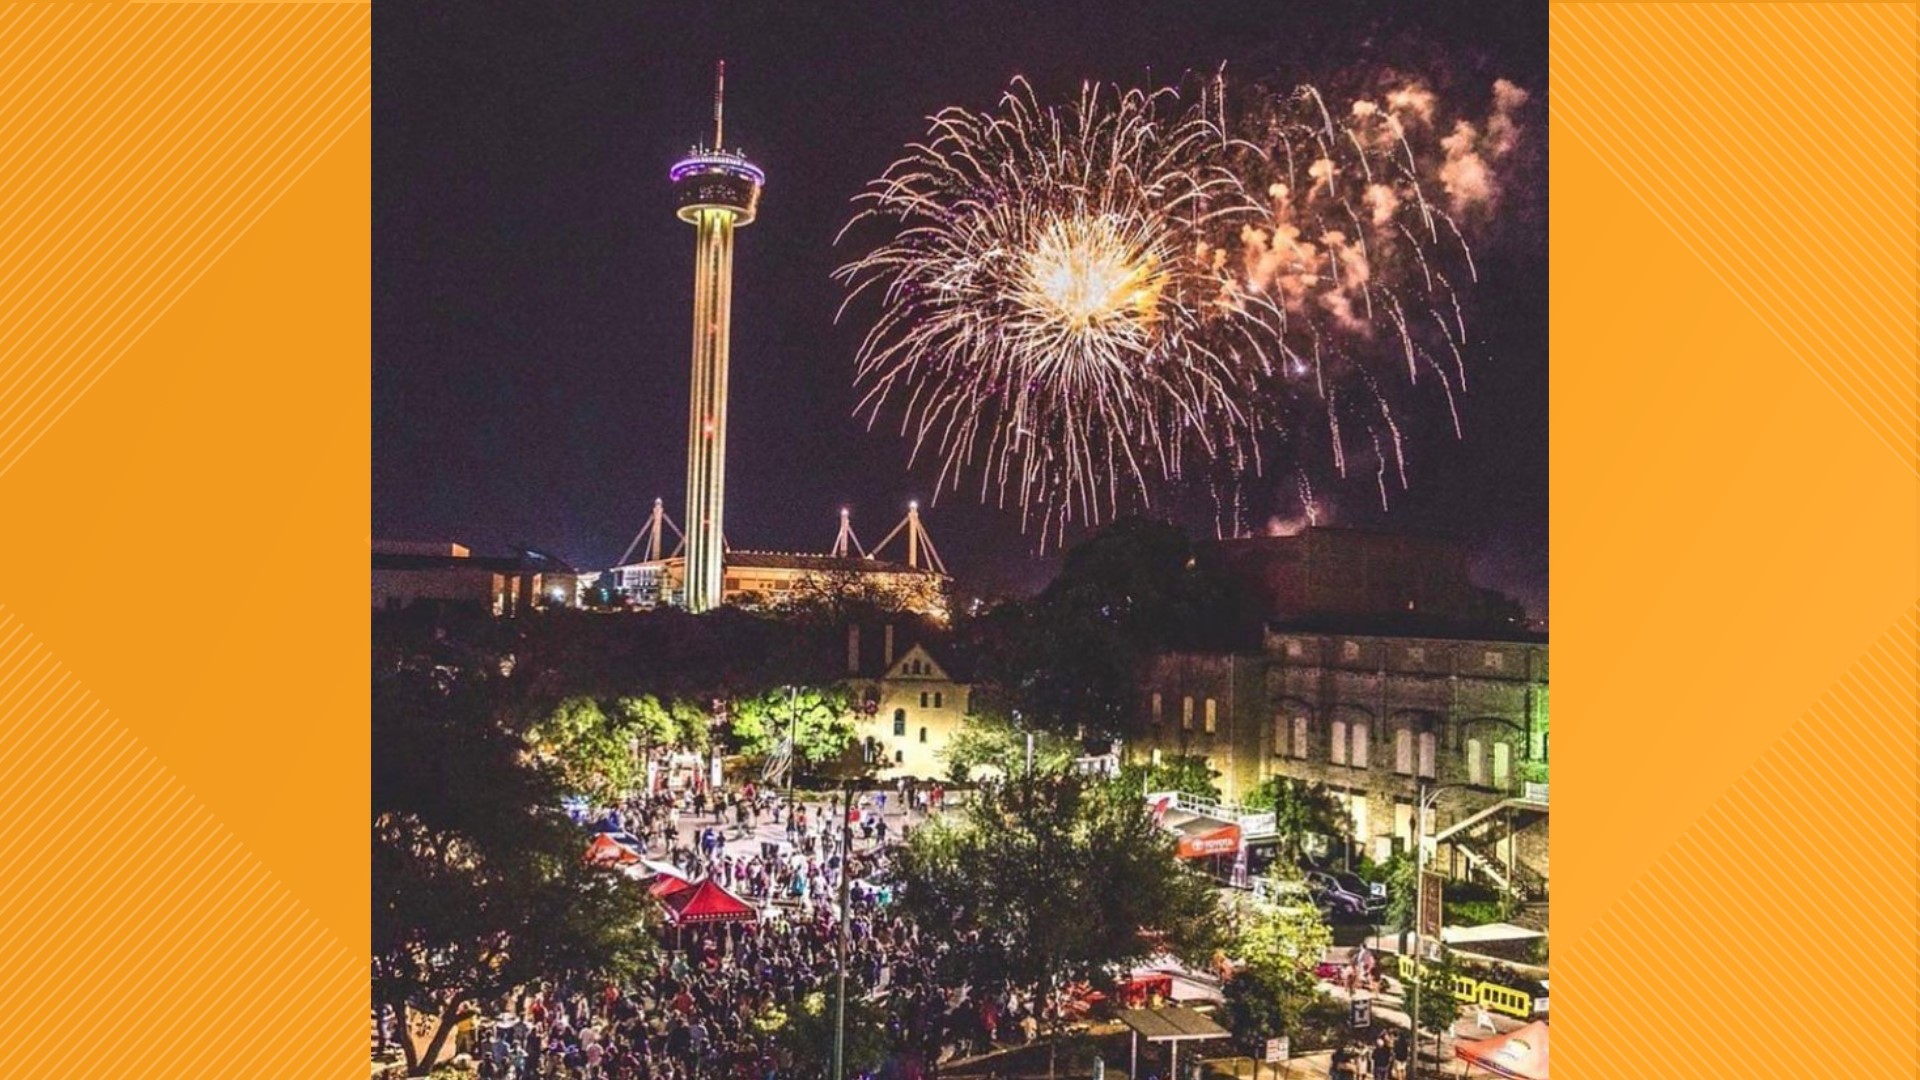 San Antonio's biggest party unfolds in June this year, and will kick off with Fiesta Fiesta at Hemisfair.